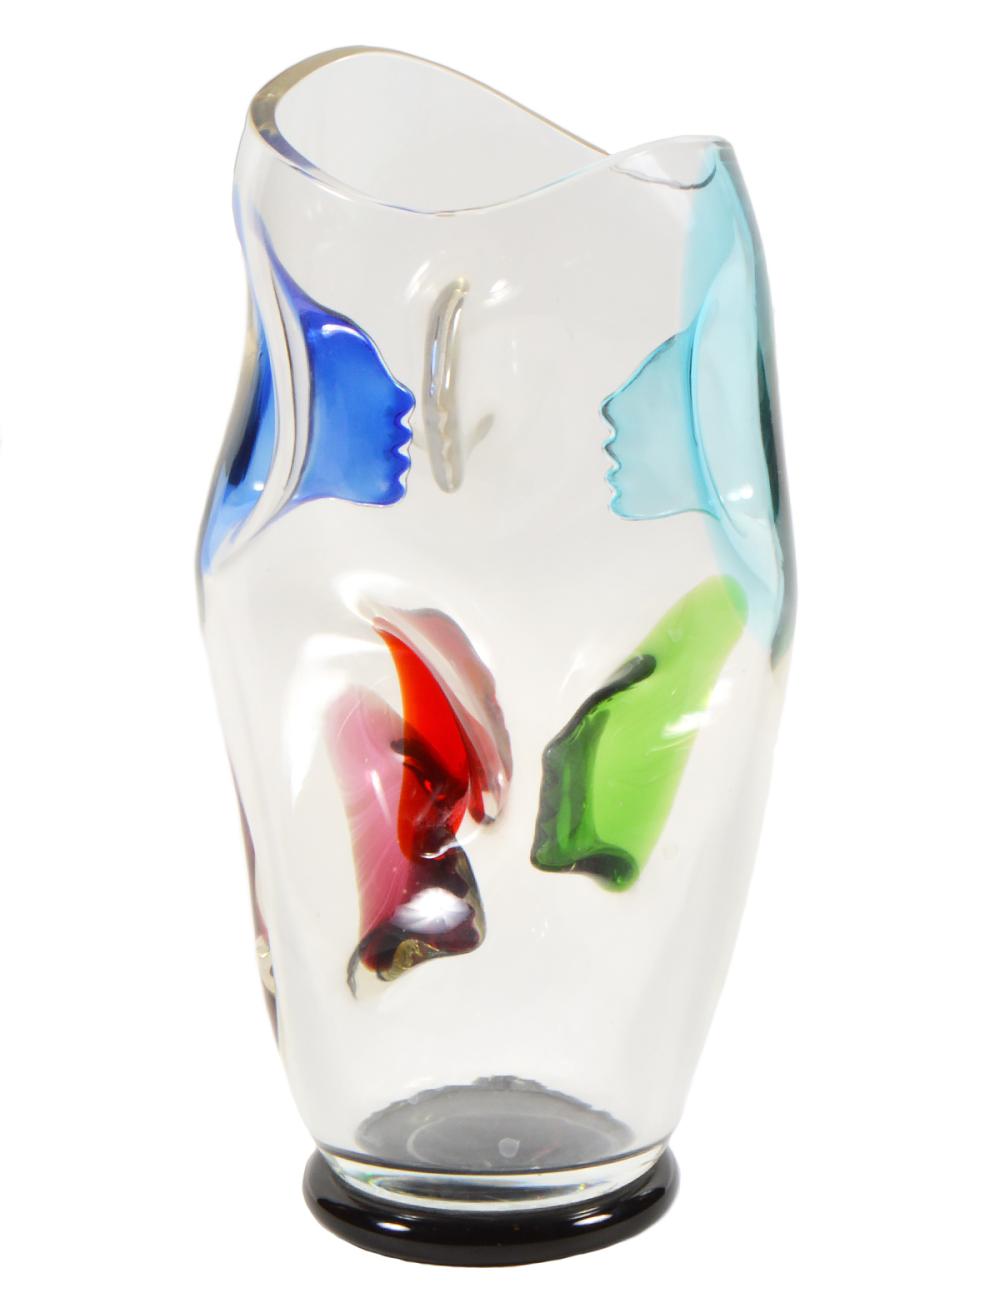 GLASS VASE WITH COLORED INVERTED 337e21